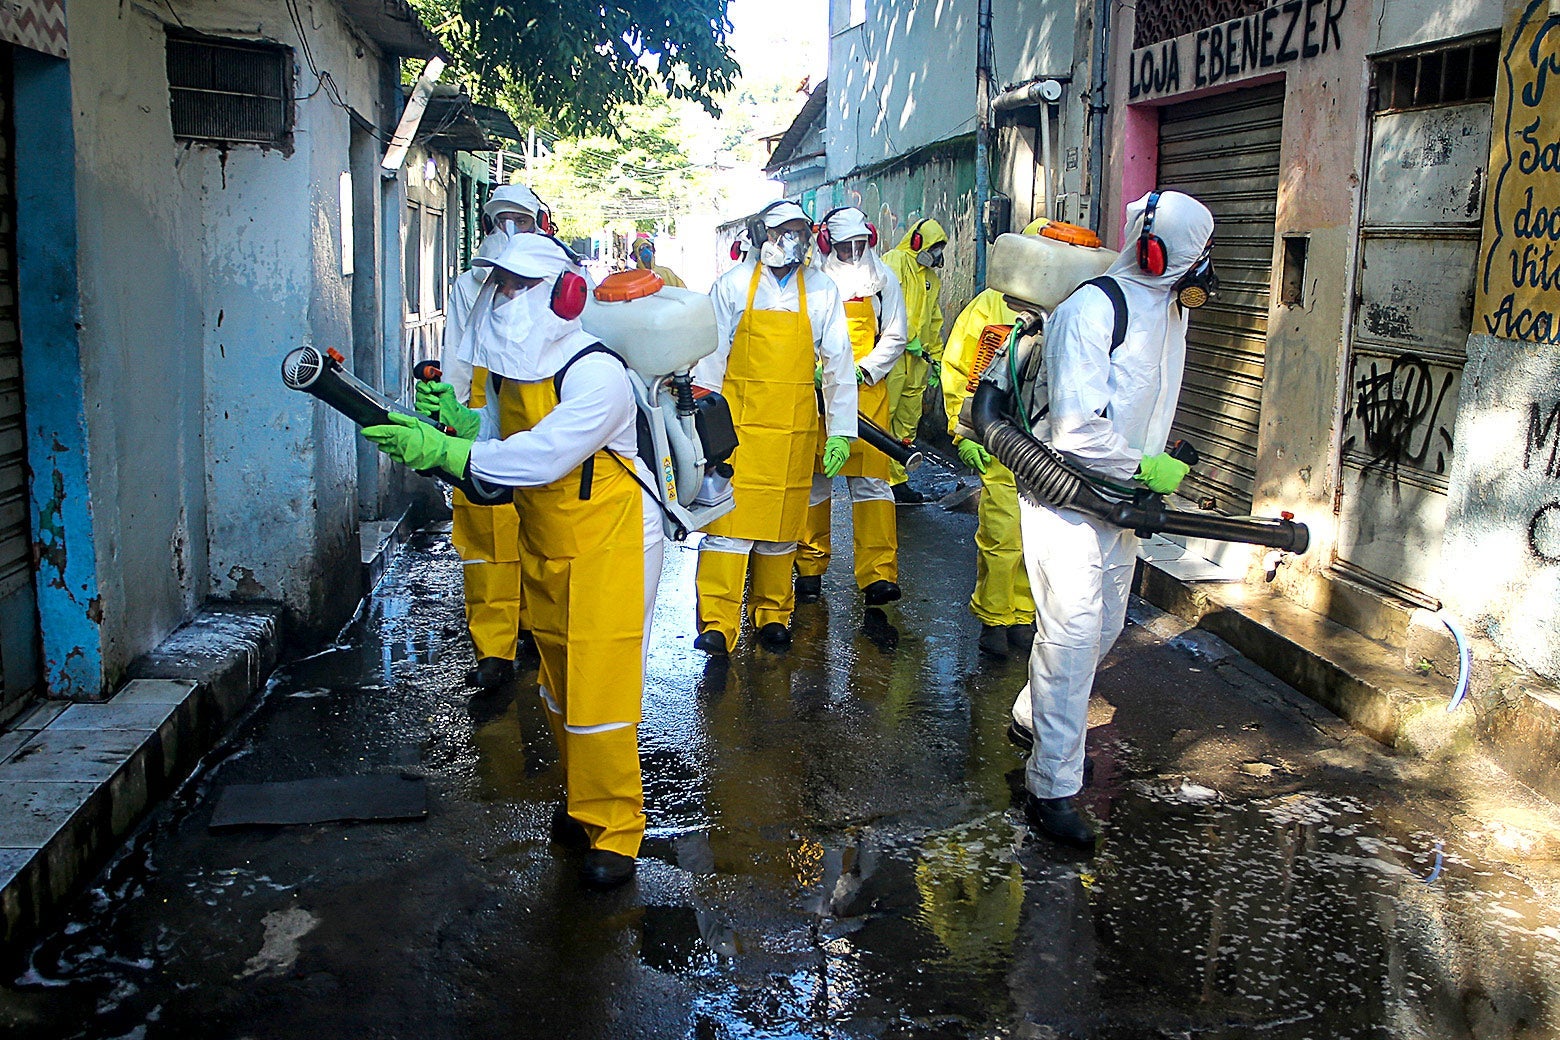 People wearing protective suits and masks and headphones carry vacuums while walking down the aisle of a favela.